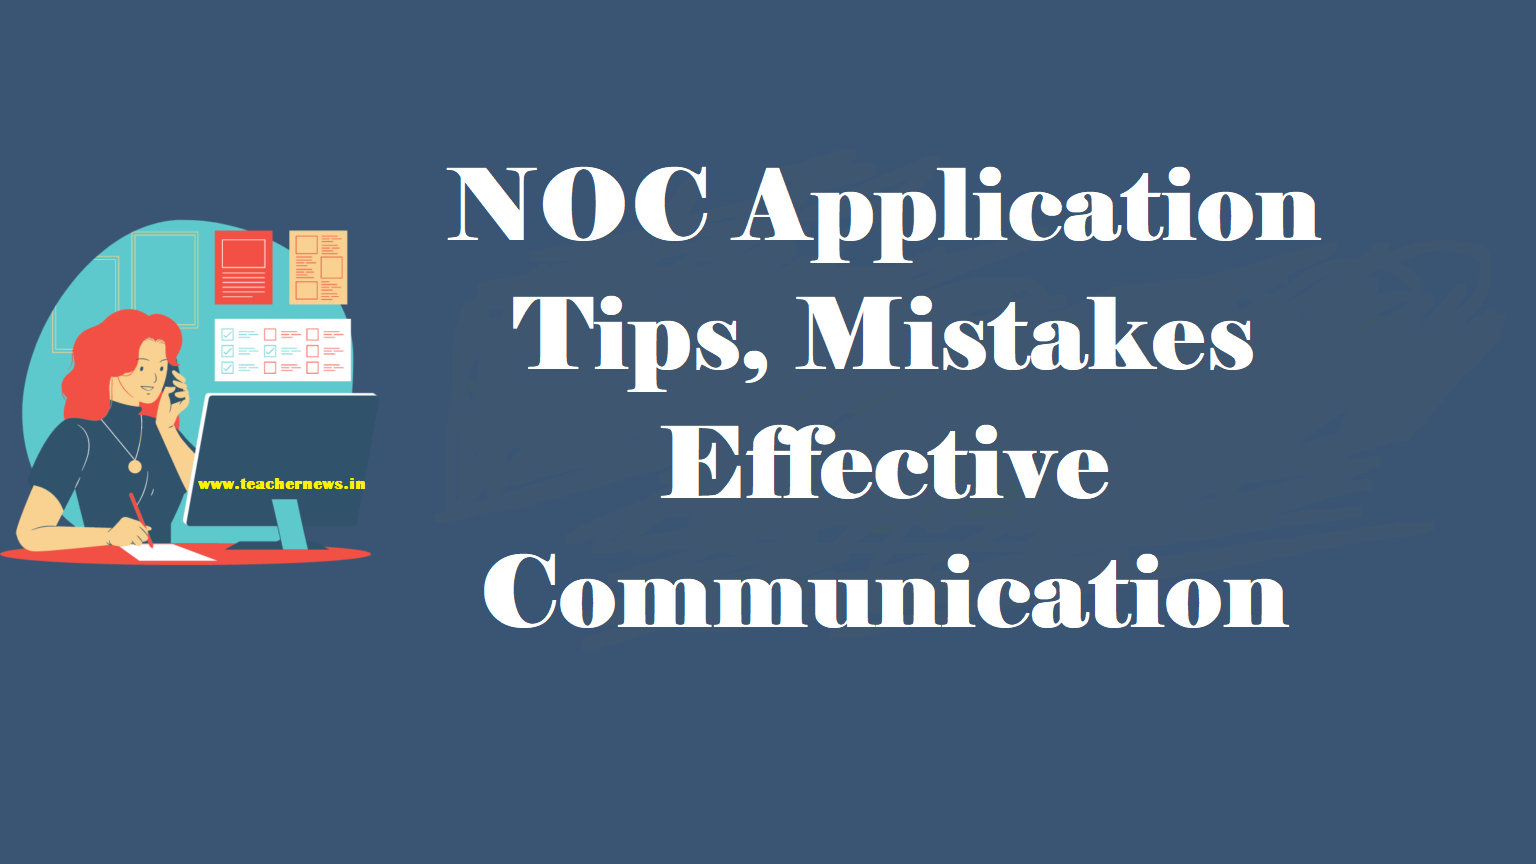 NOC Application: Tips, Mistakes to Avoid, and Effective Communication 2023